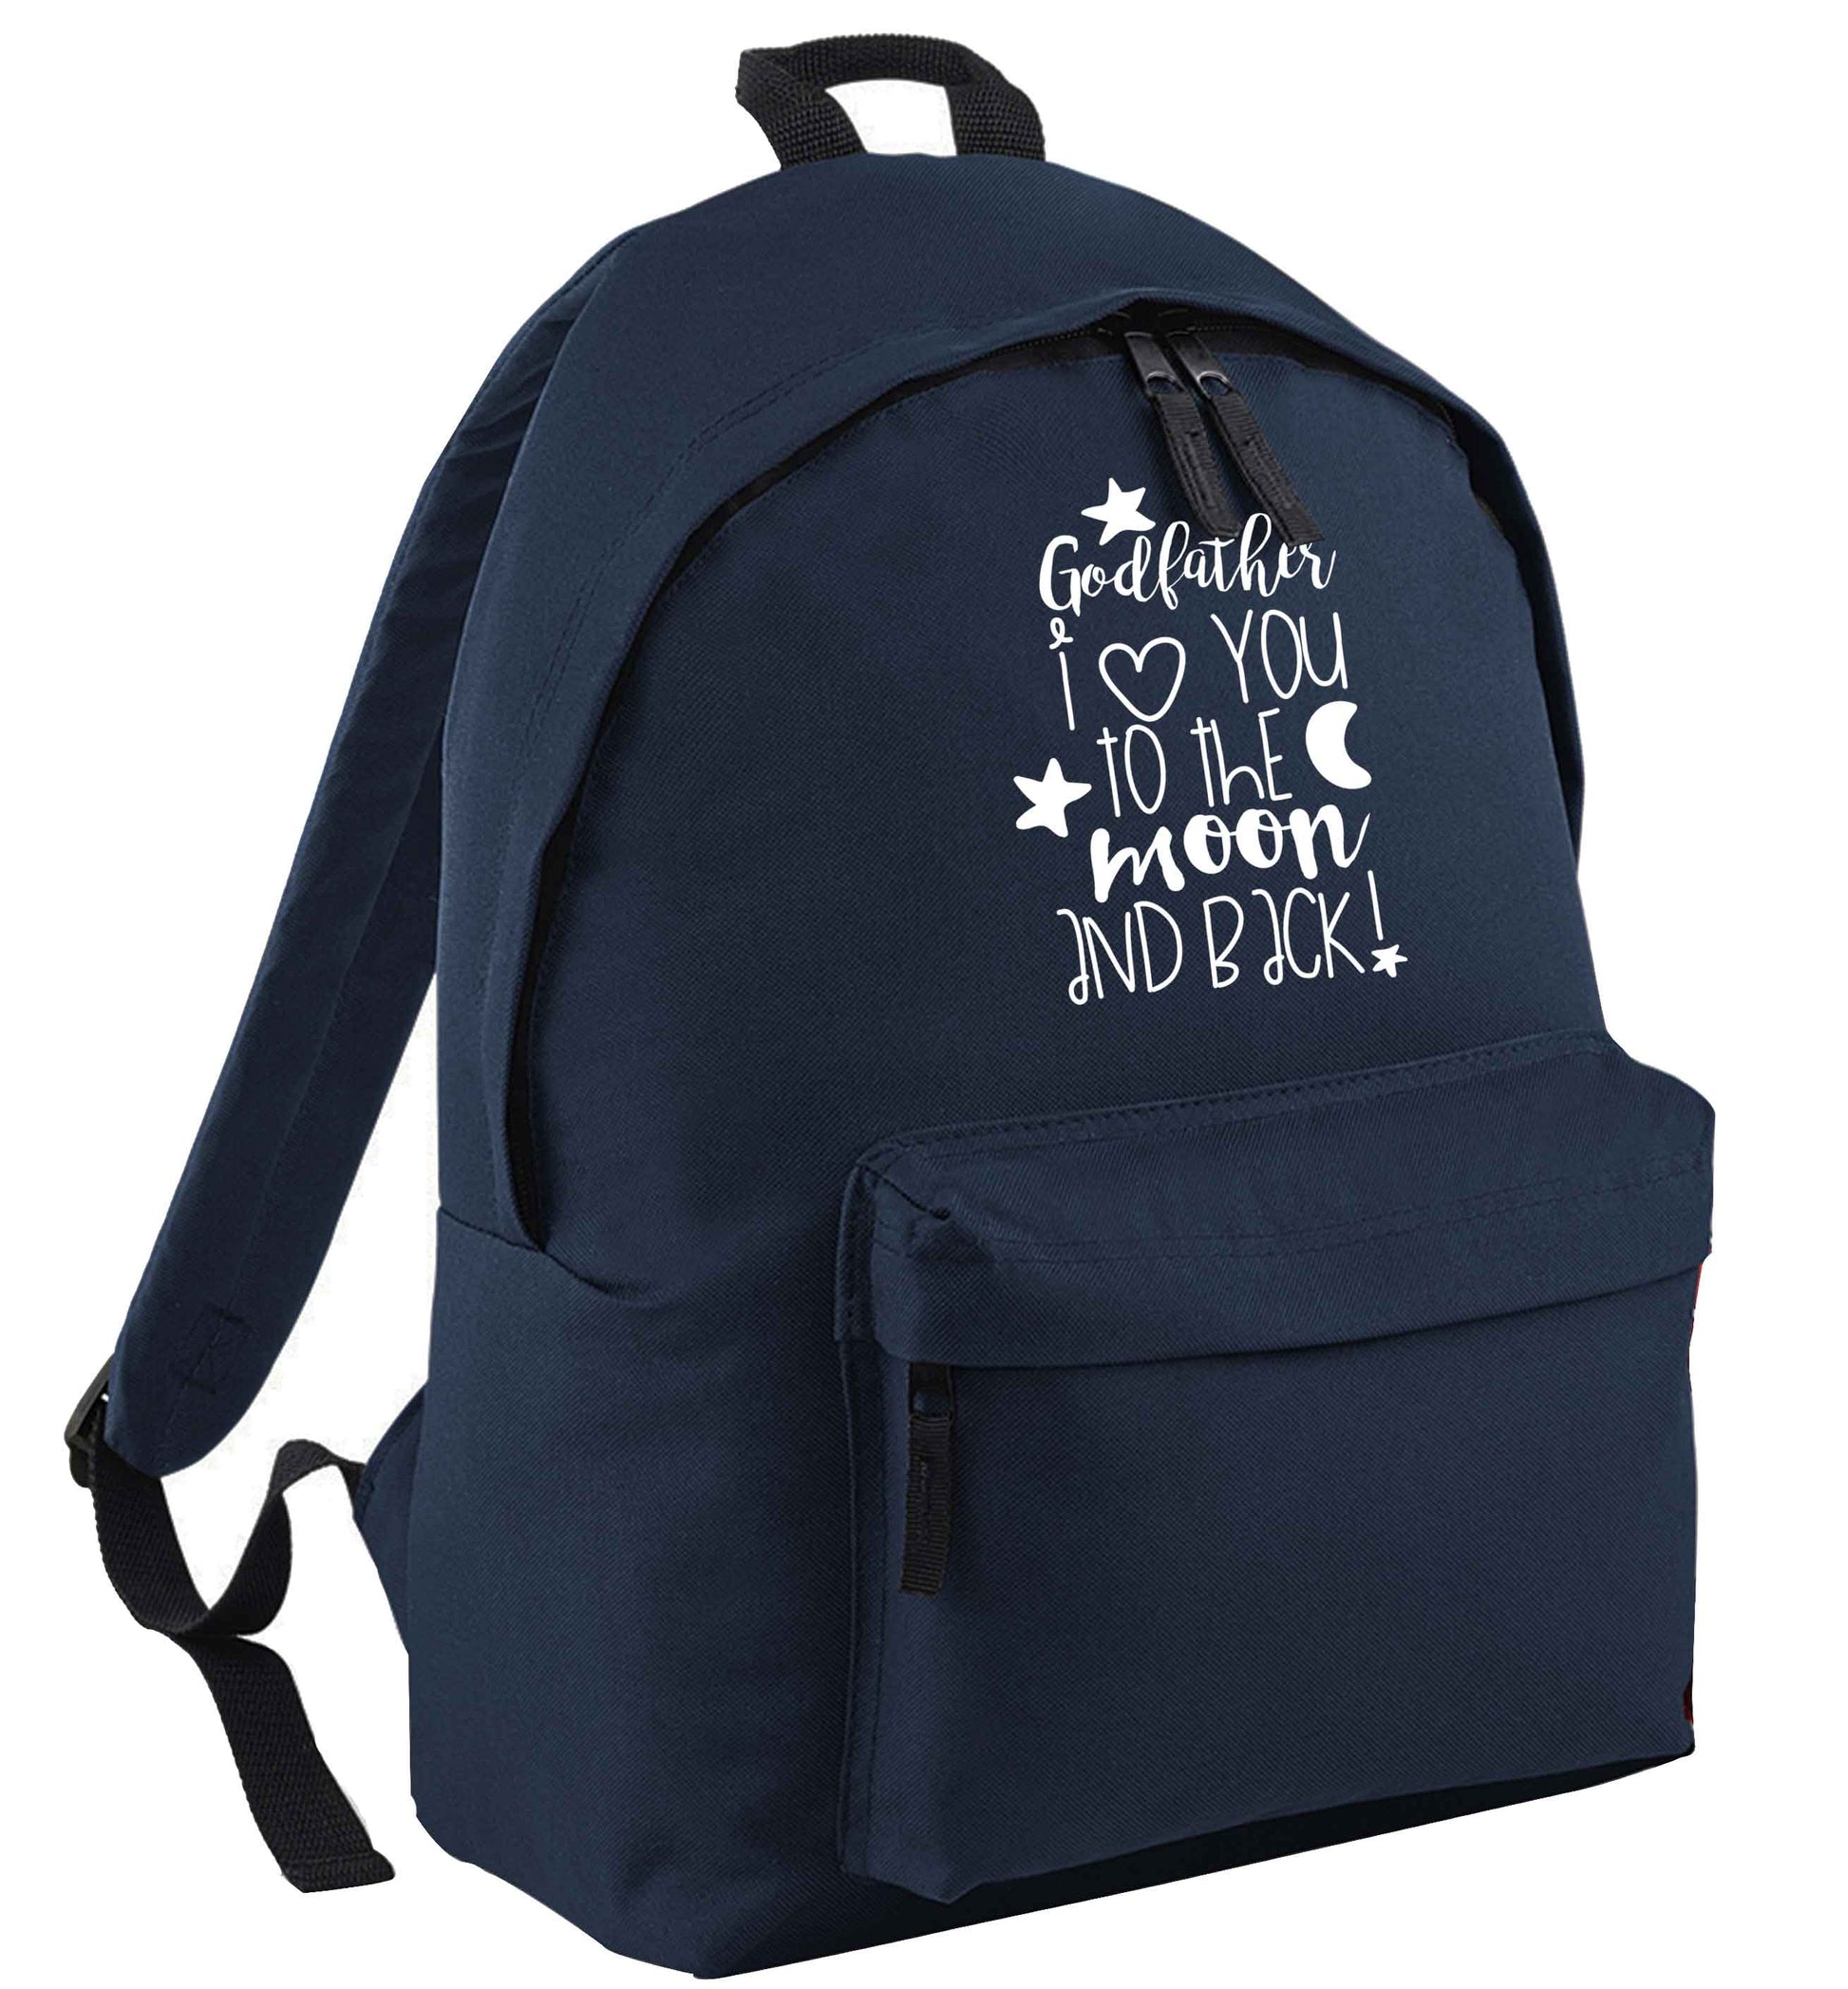 Godfather I love you to the moon and back navy adults backpack